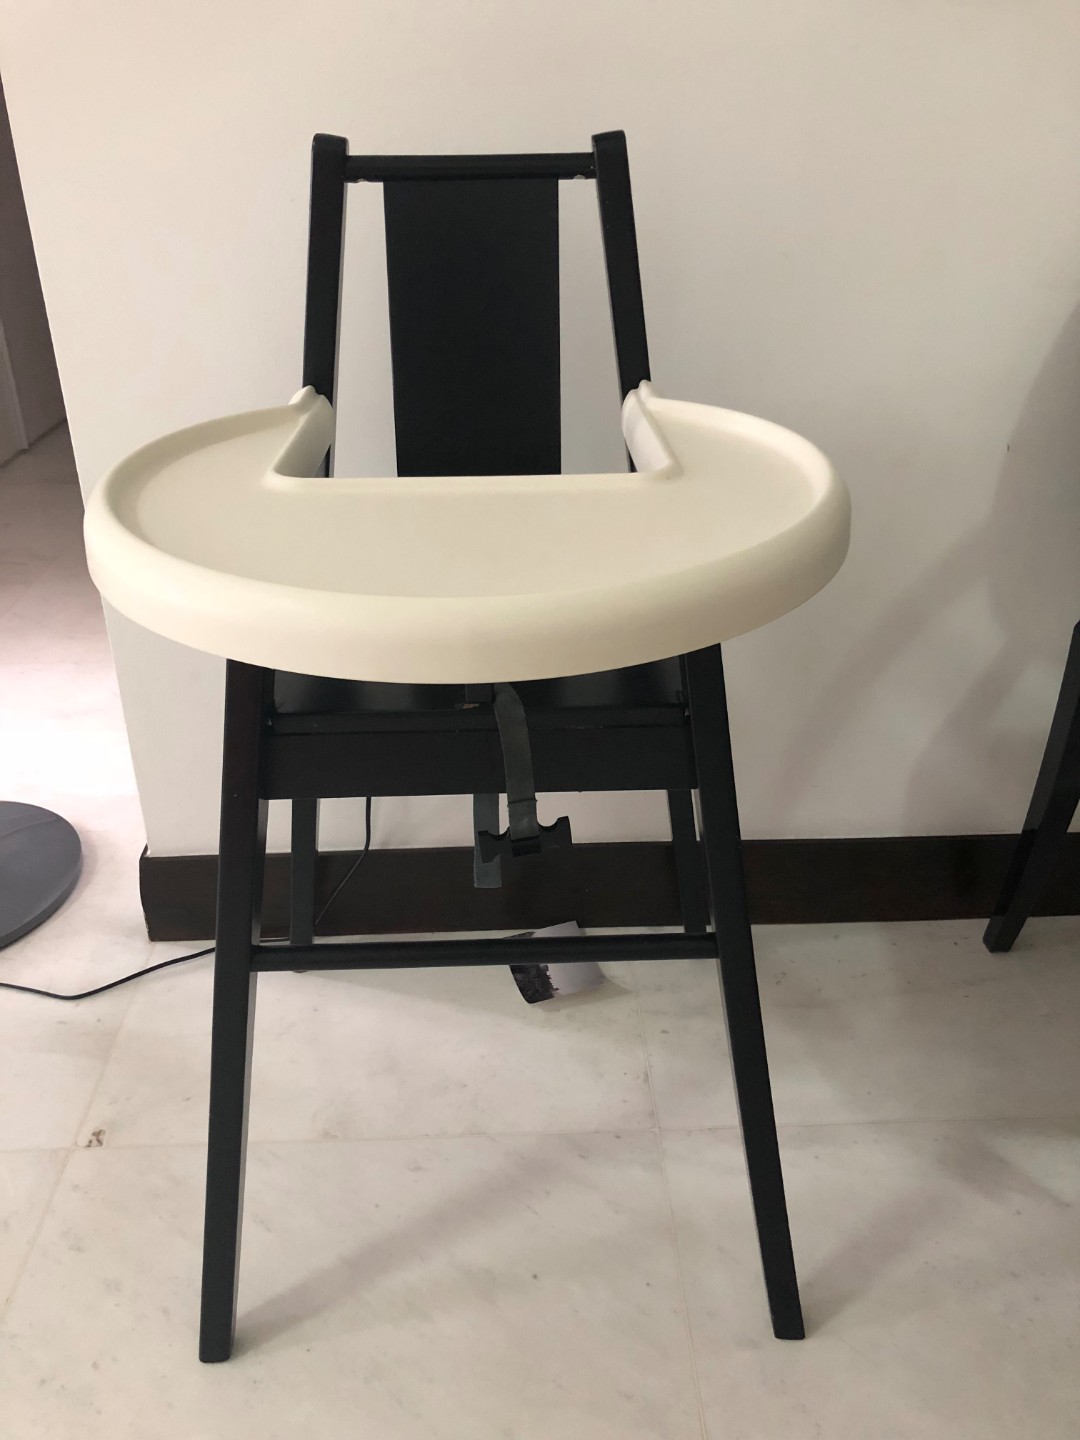 highchair insert for small babies